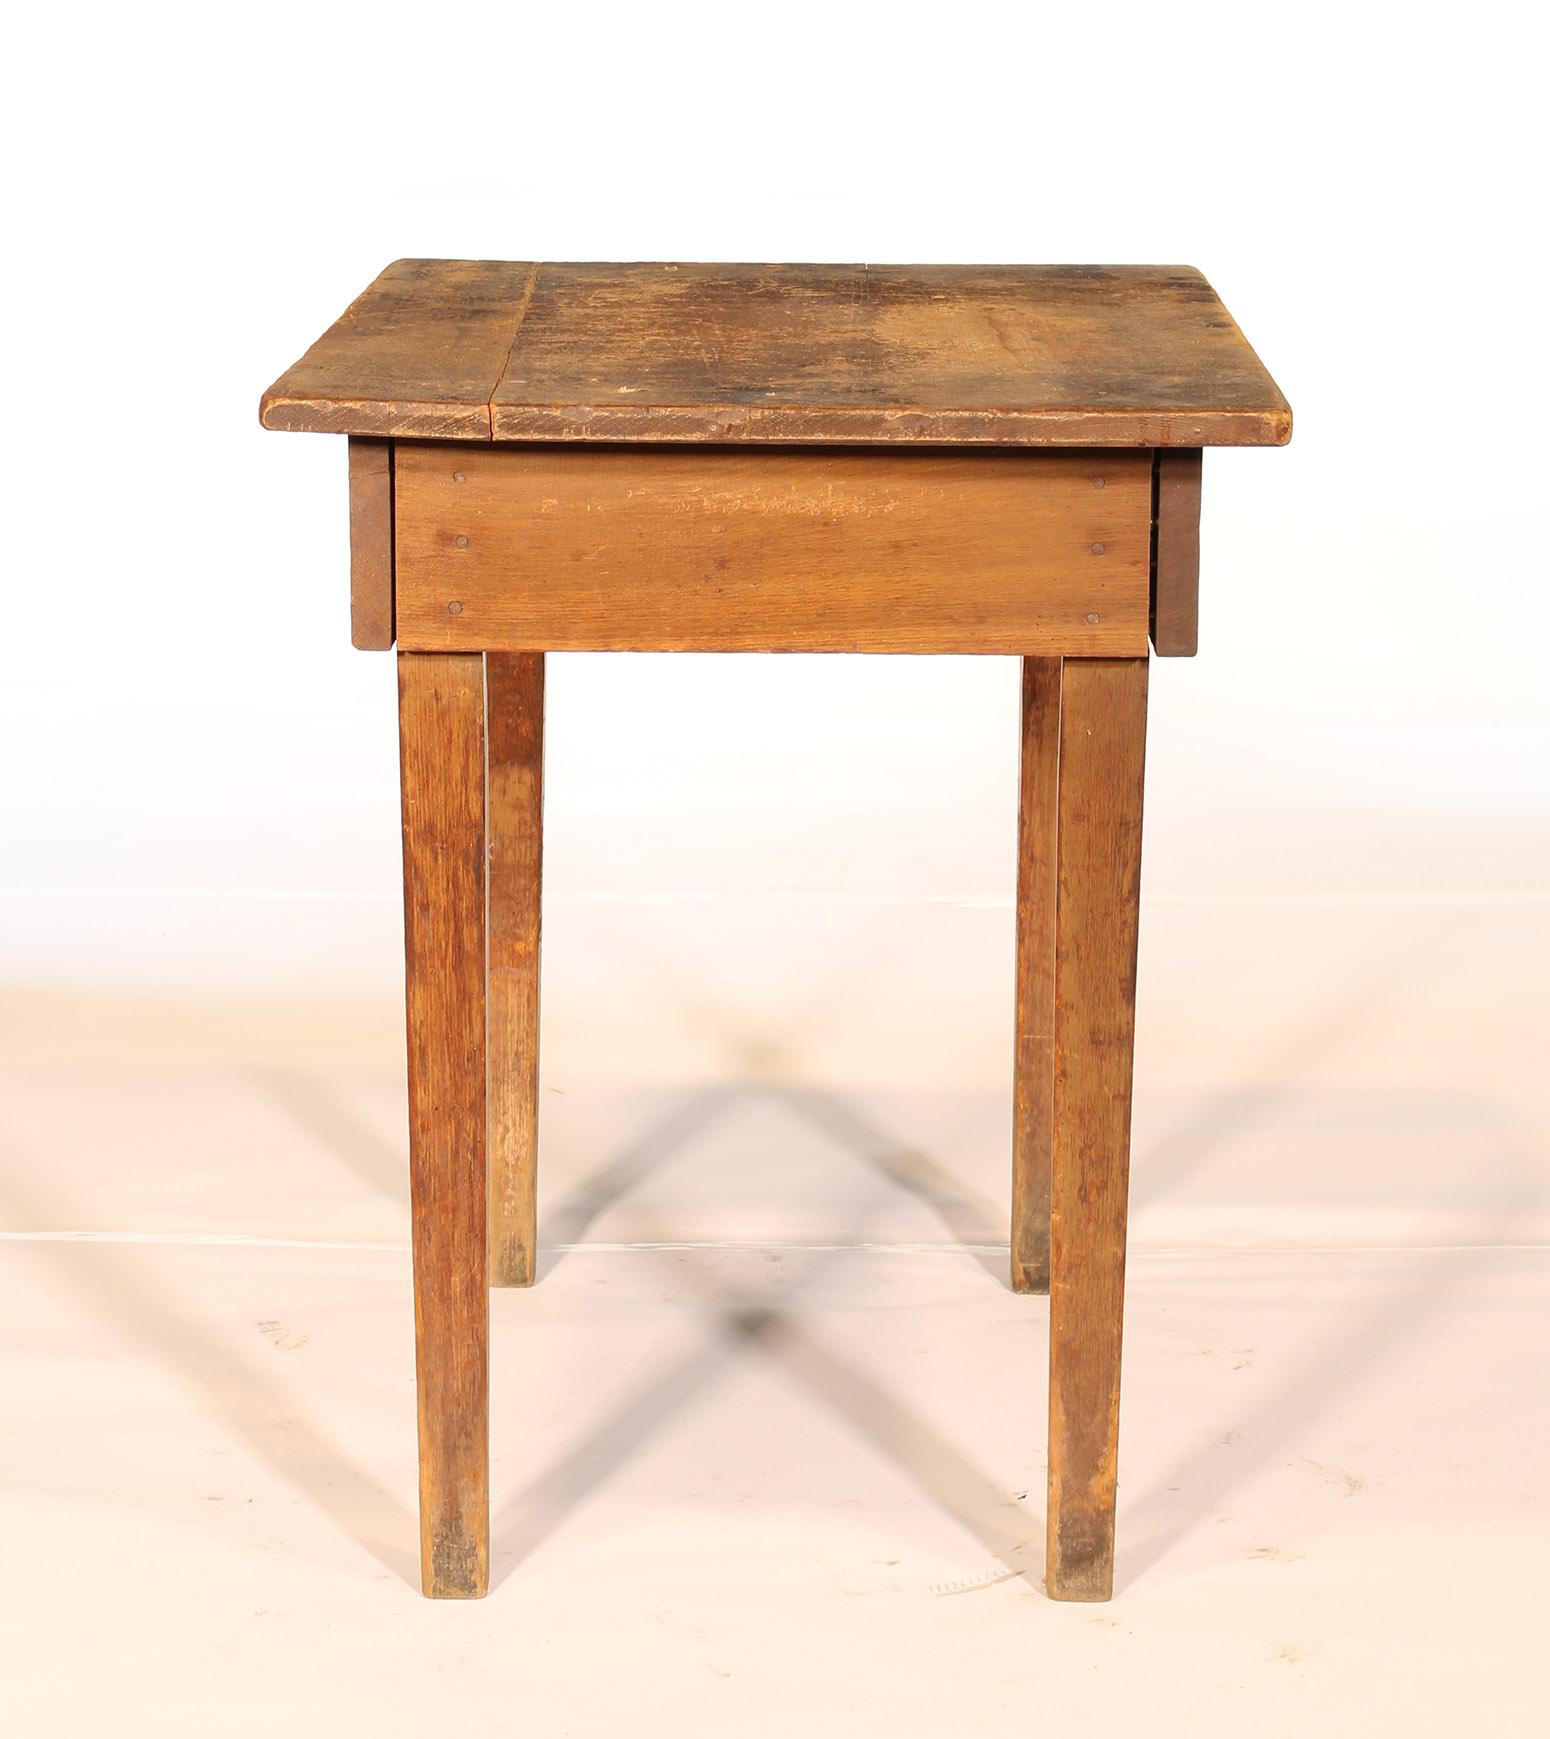 Primitive / Country Style Wooden School Desk / Table 3